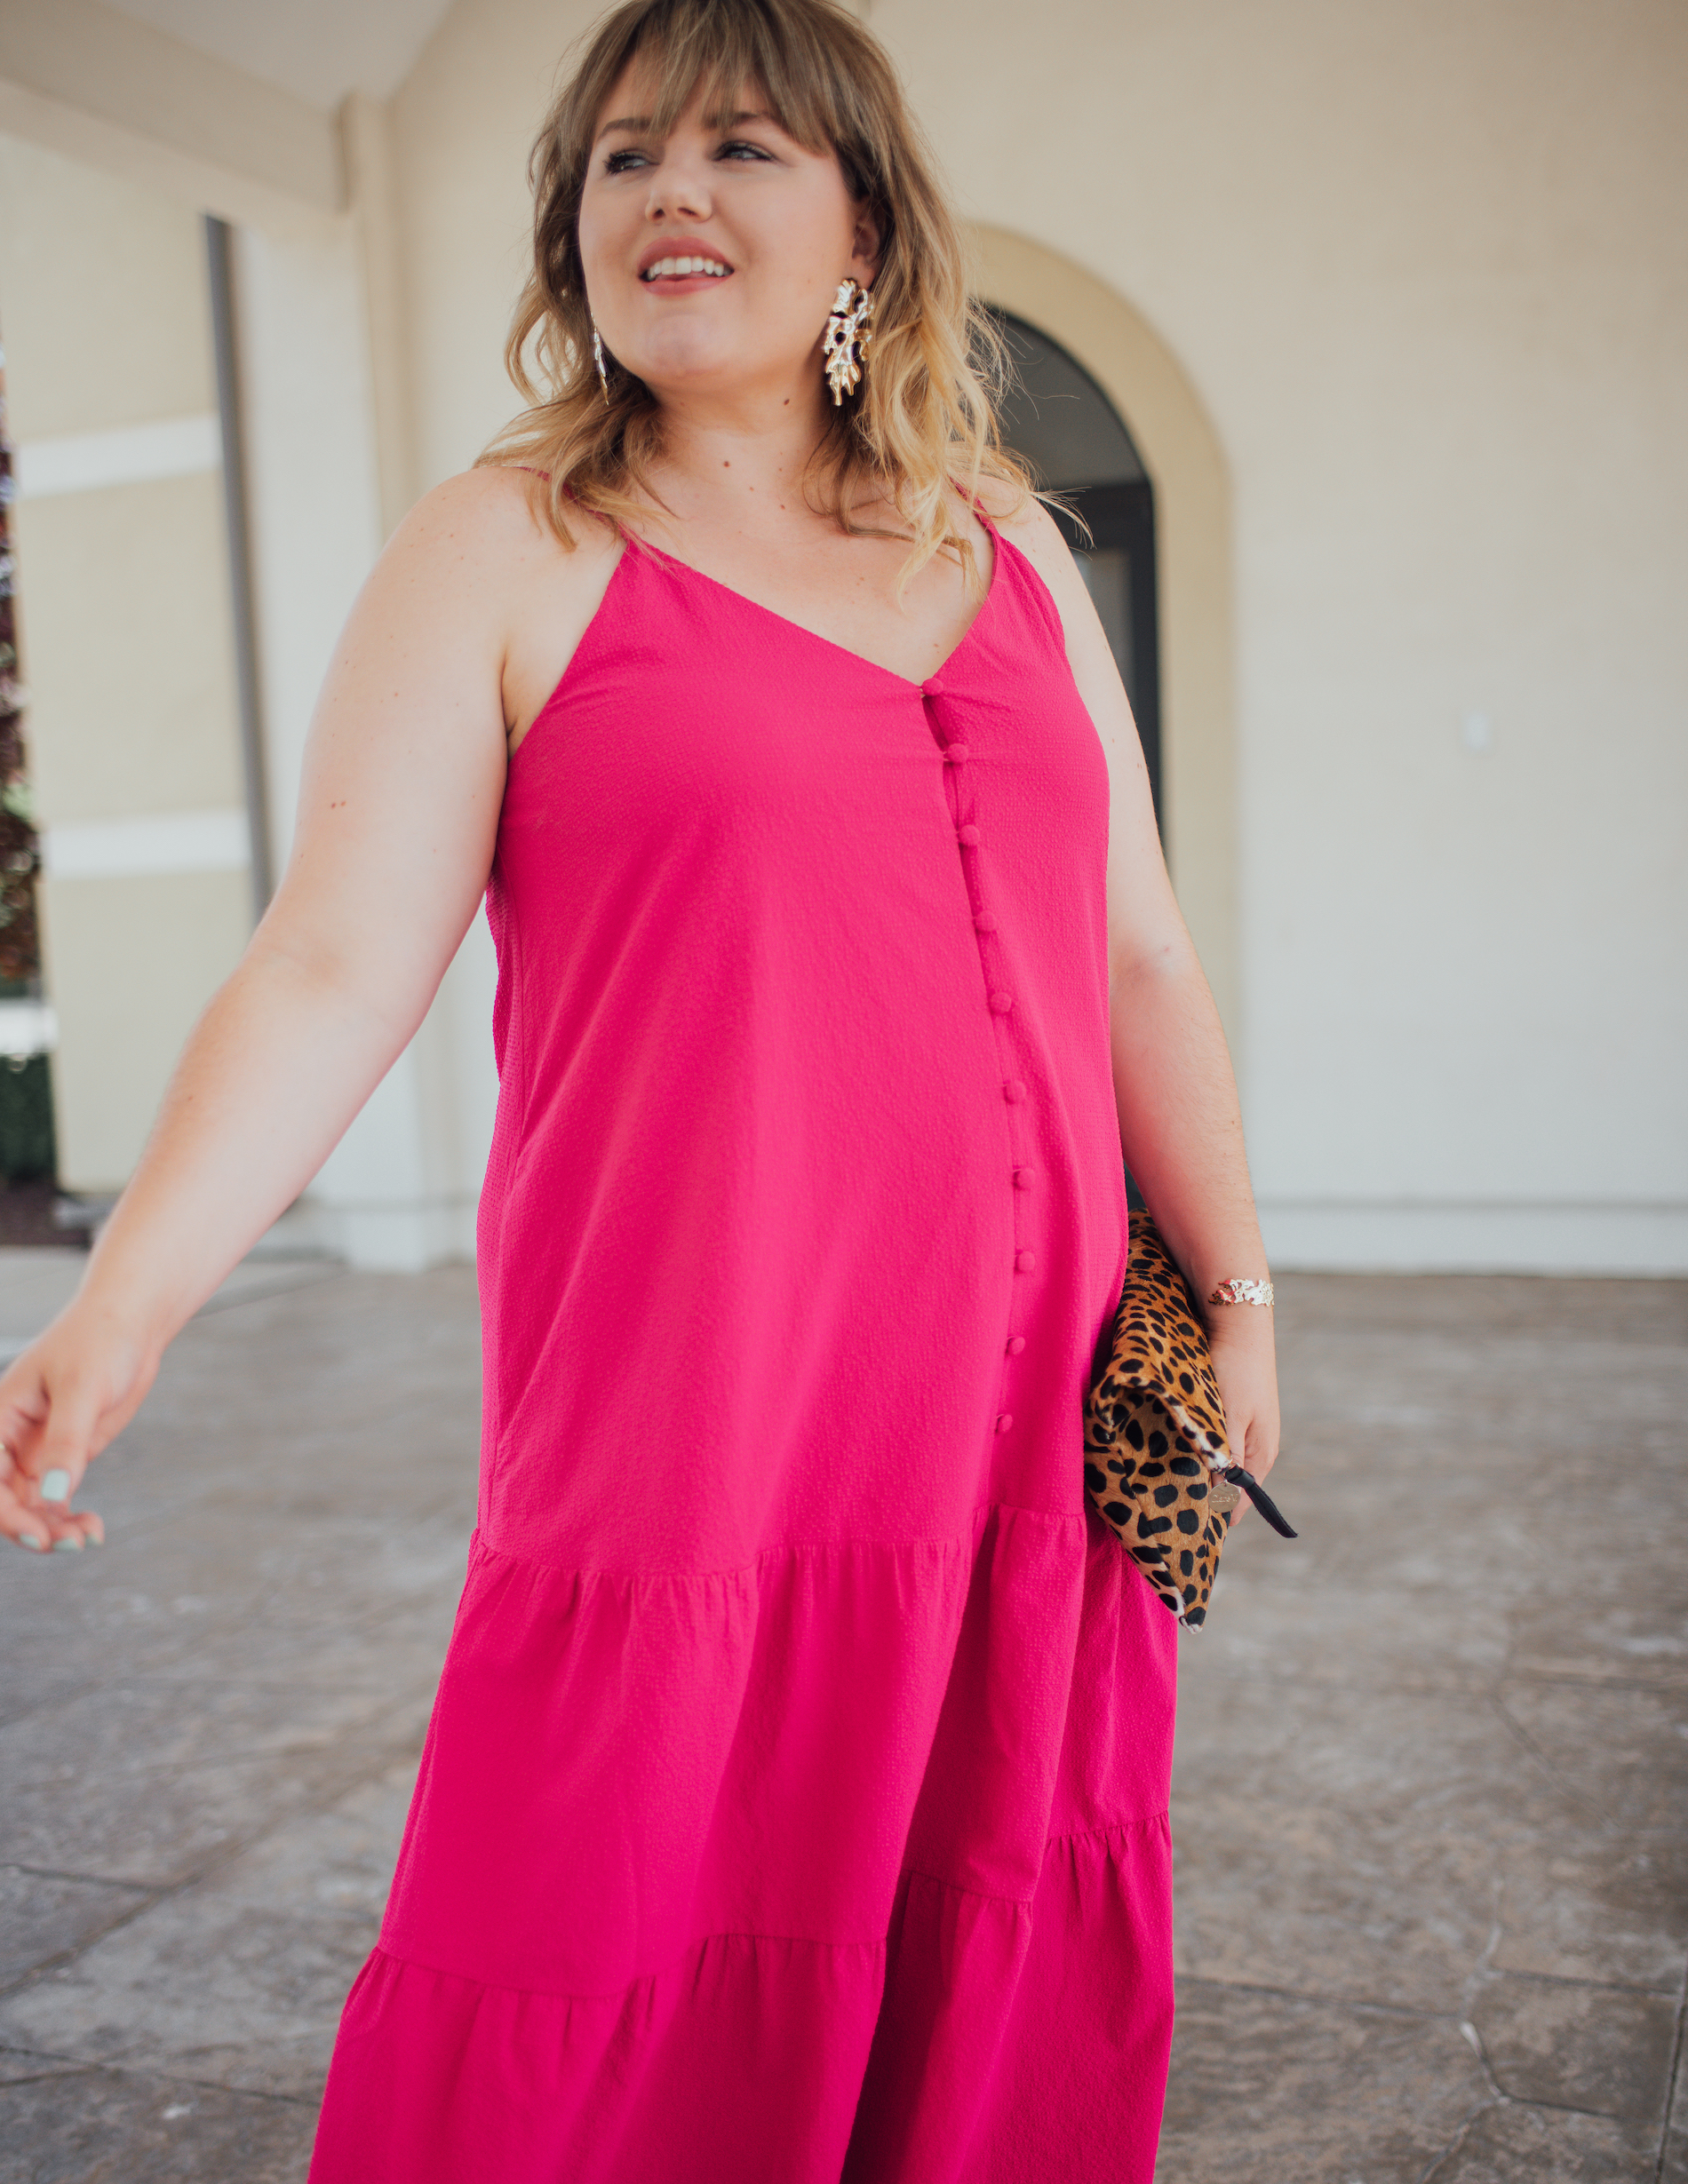 Pink + Leopard. Sharing some chic pink and leopard pieces that make the perfect summer outfit, great for hot days! 